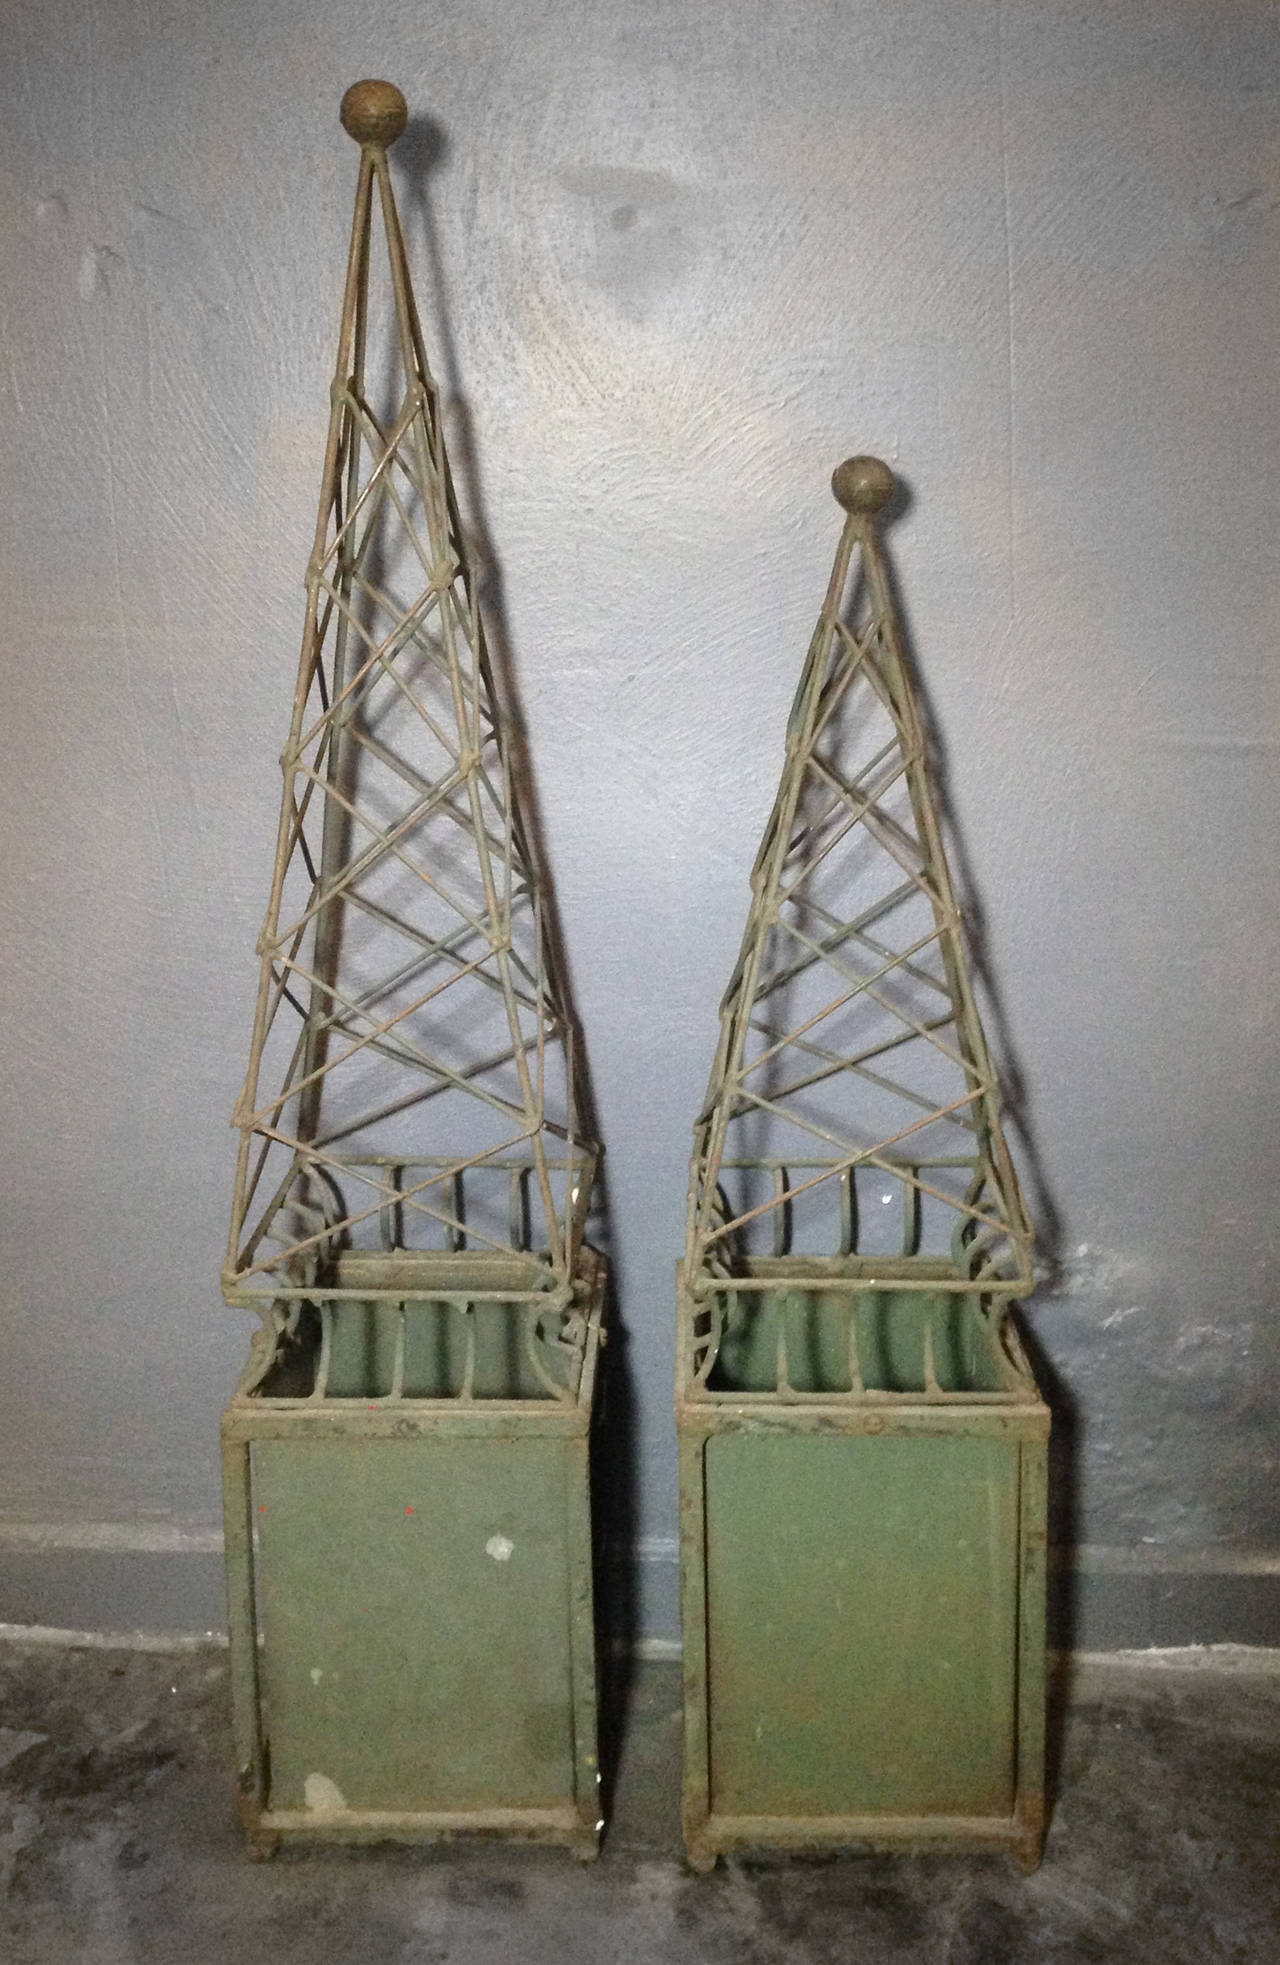 Pair of metal obelisks sculptures after Arturo Pani, 1970s.
Good original condition with minor fading. Two sizes available:

Dimensions: 
Two pairs of 29 inches of height x 6 inches of width x 6 inches depth.
One pair of 24 inches of height x 6